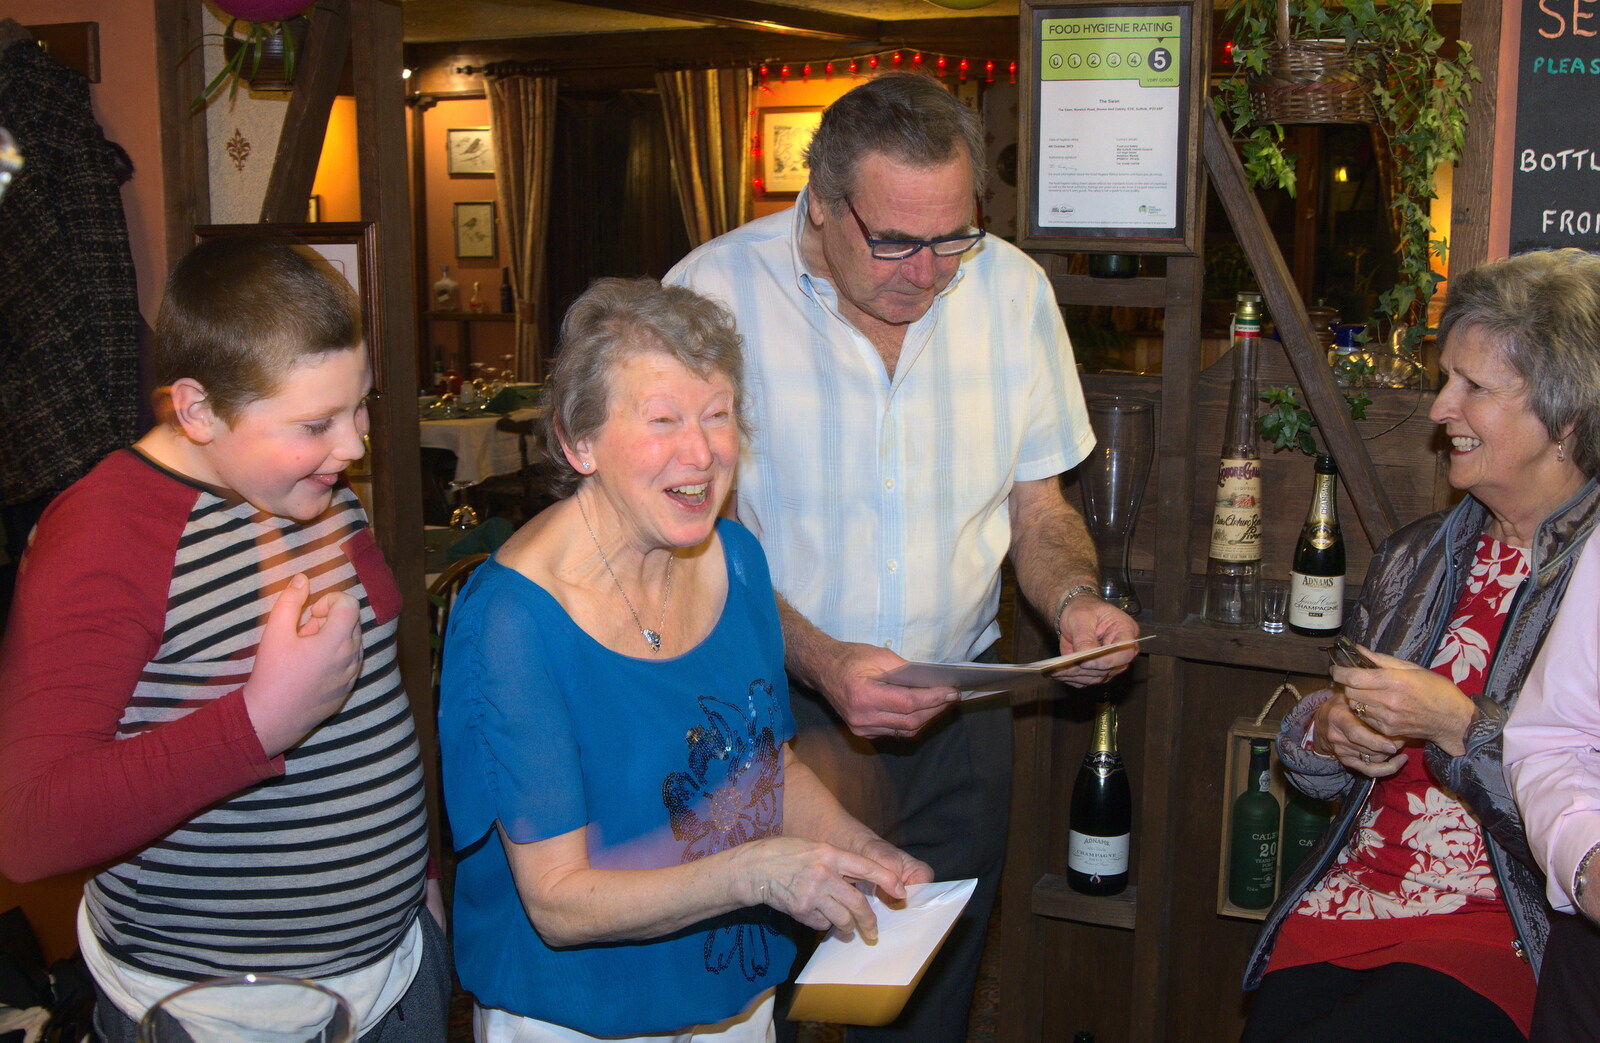 Sylvia's surprised from Sylvia's 70th Birthday up the Swan Inn, Brome, Suffolk - 11th February 2017